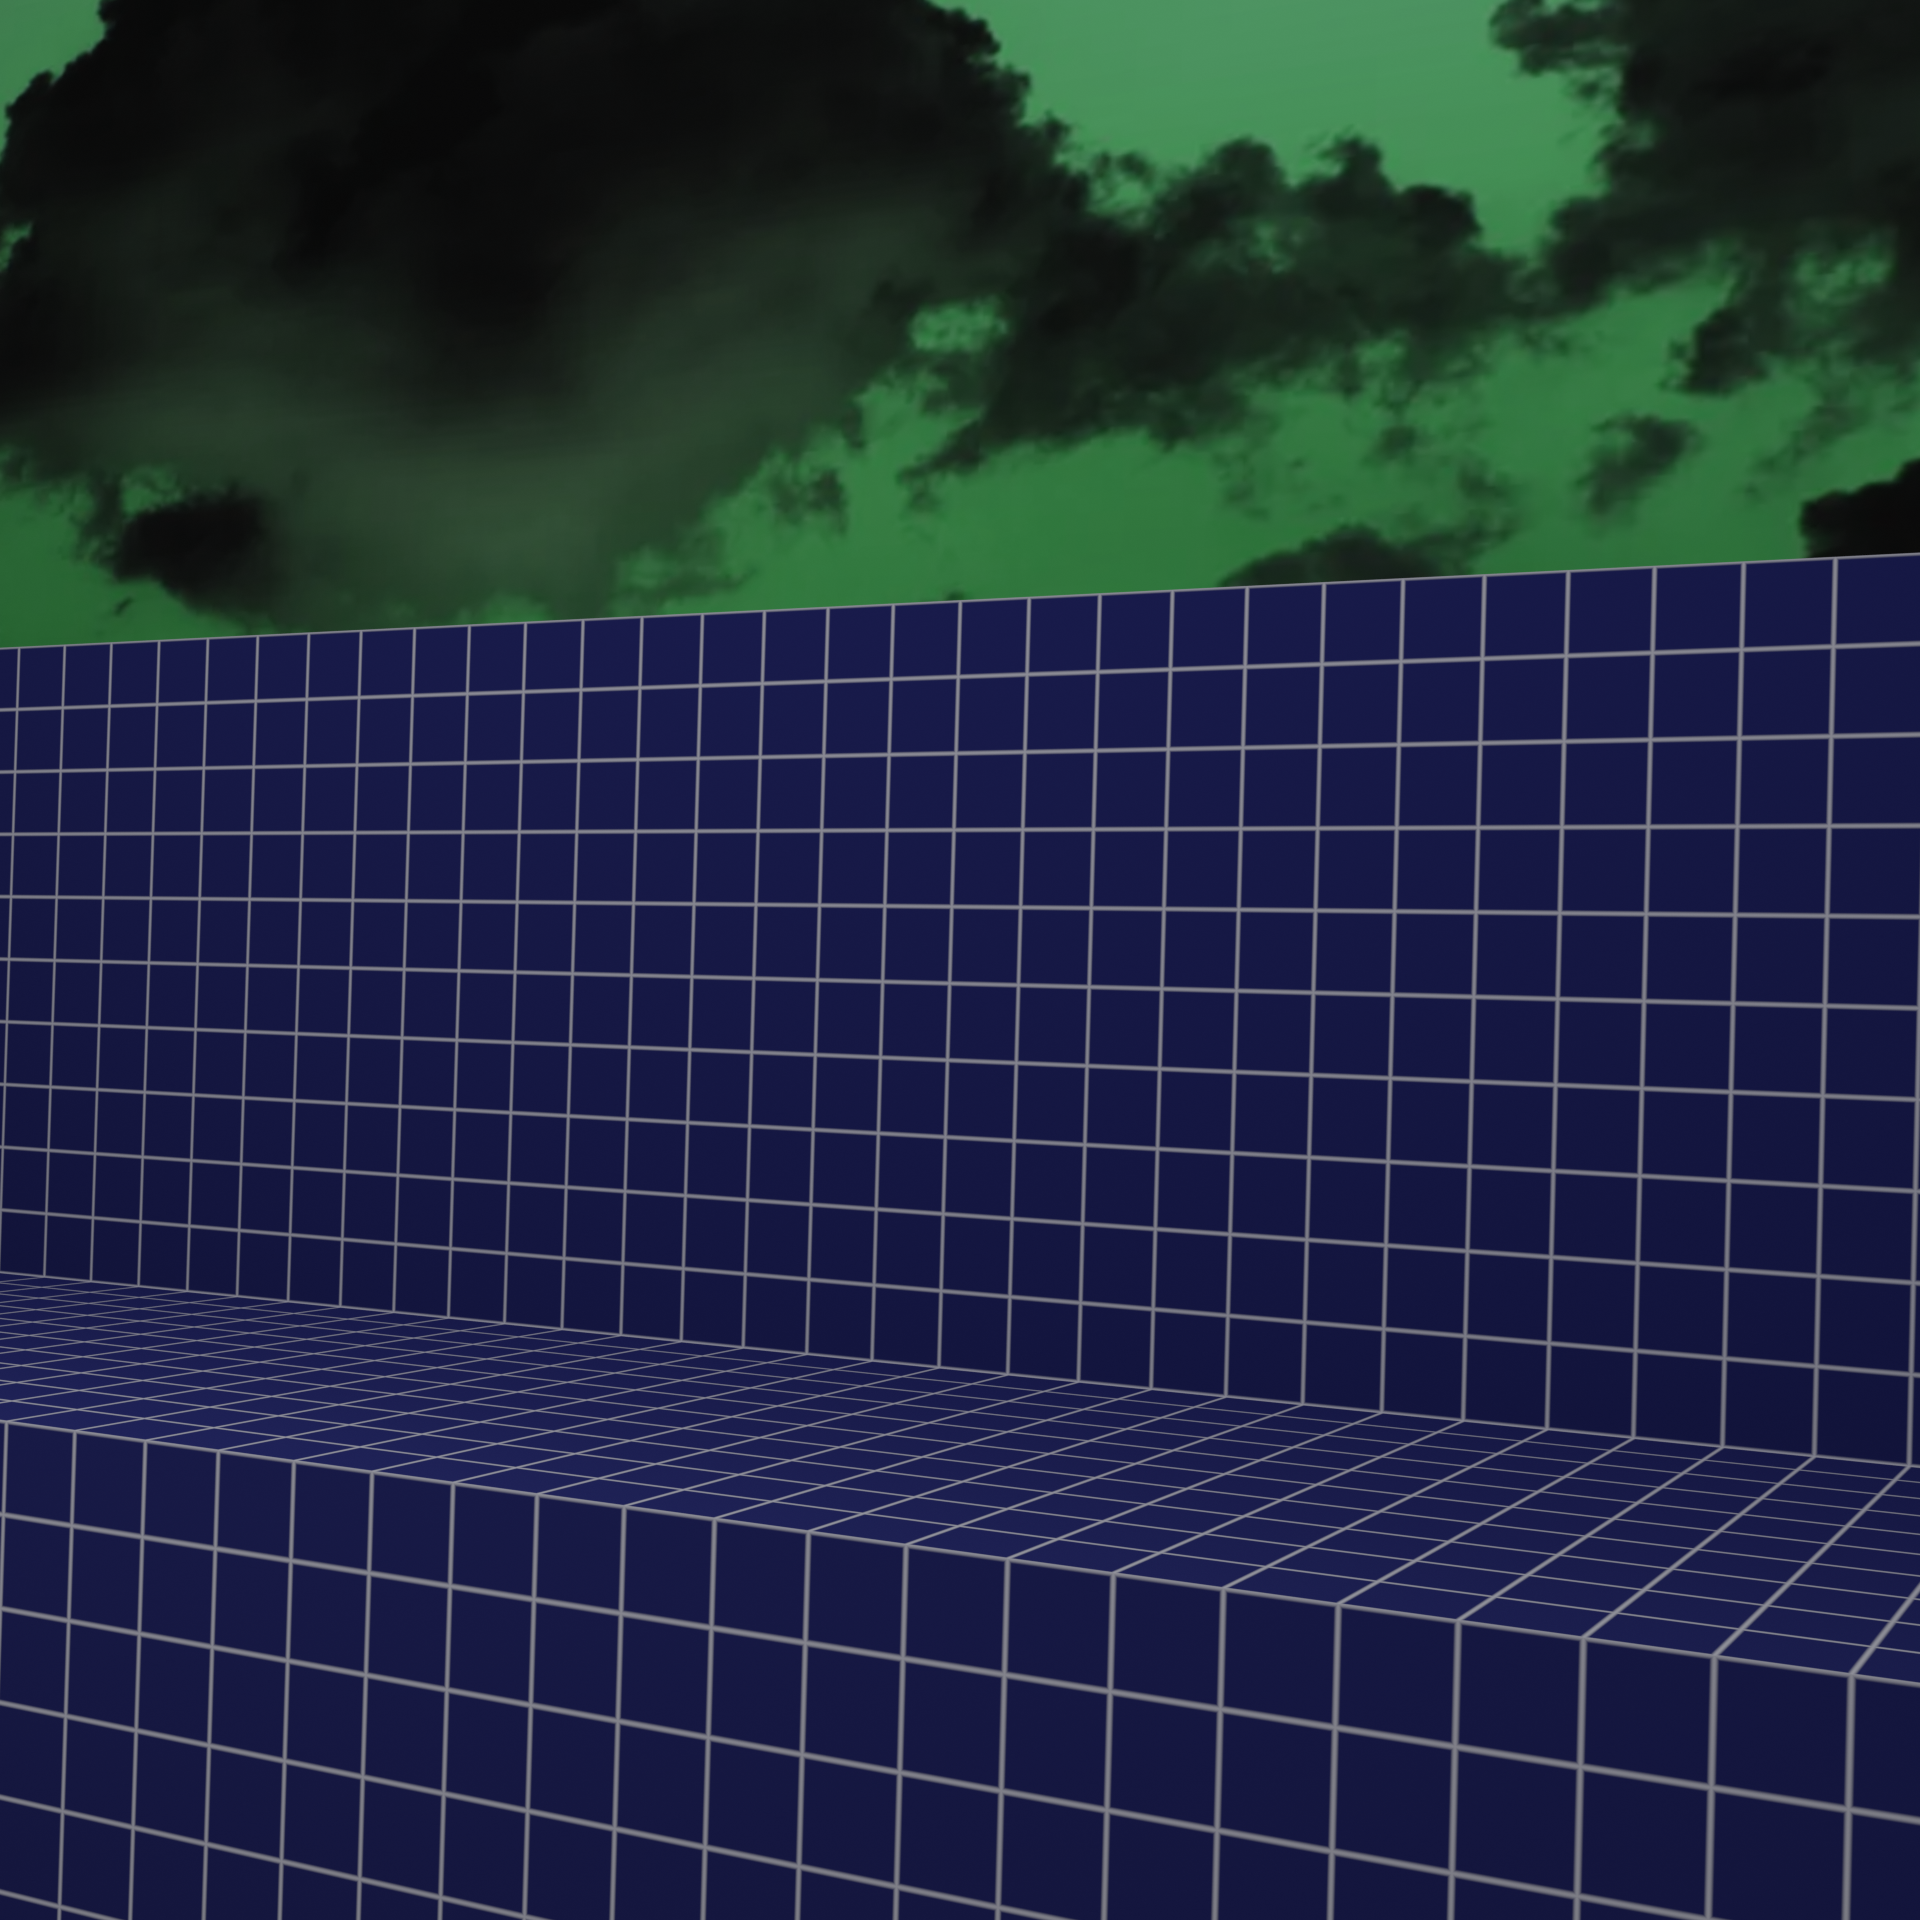 A render of the scene described in my favorite sketch. The grid is navy with white squares. The horizon has black clouds with a green sky.